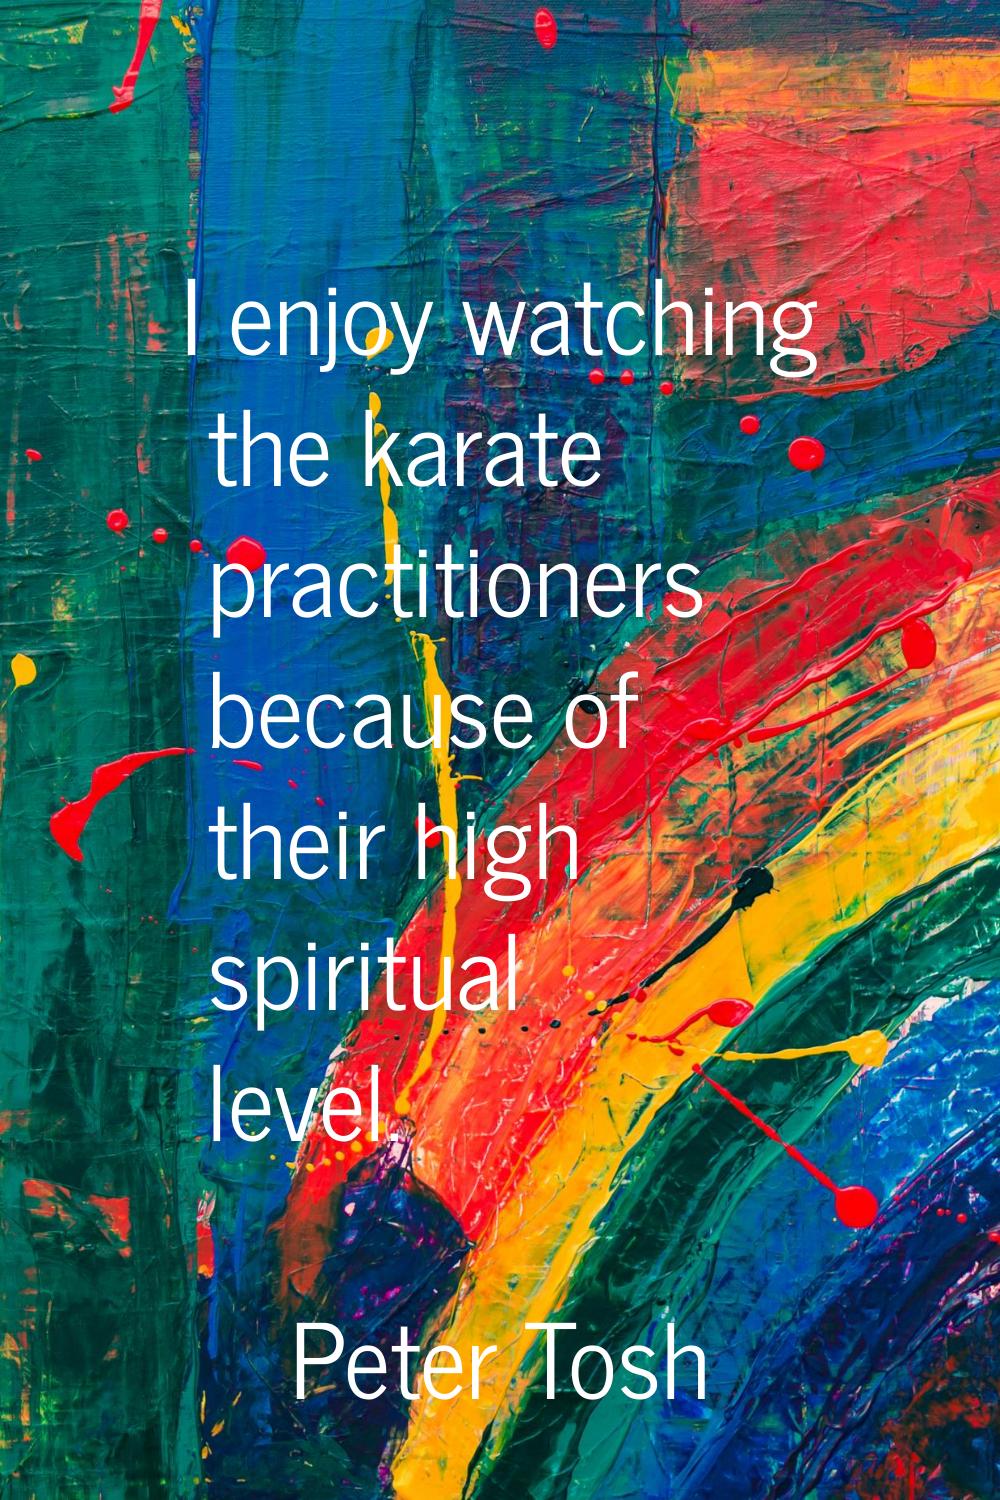 I enjoy watching the karate practitioners because of their high spiritual level.